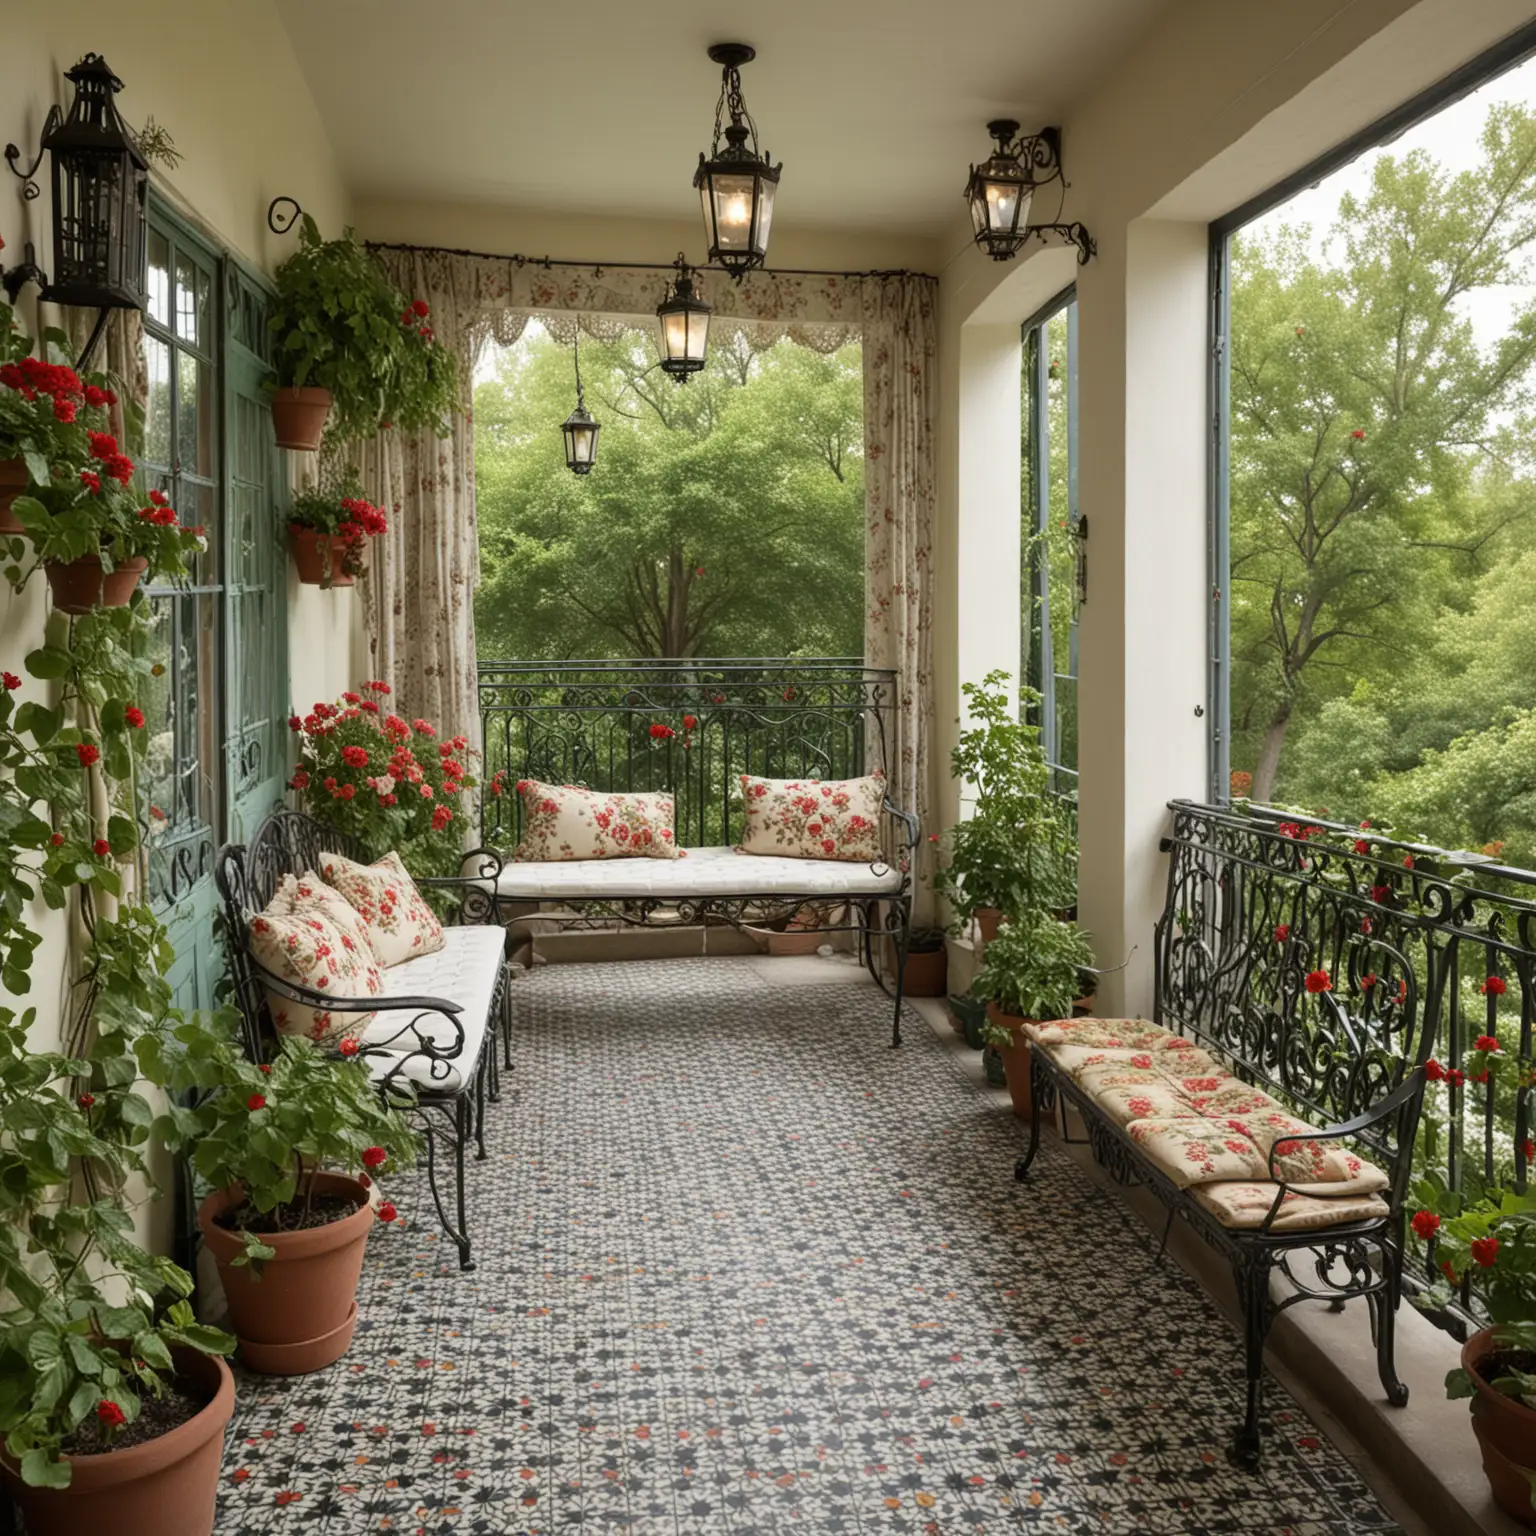 a wide of shot of balcony with patterned floor tiles and wrought-iron railings. The space features a vintage wrought-iron bench with floral cushions, a small wooden table, and a collection of antique lanterns. Potted geraniums and ivy add greenery. Overhead string lights and a hanging chandelier create a warm ambiance. French doors with sheer lace curtains open onto the balcony.